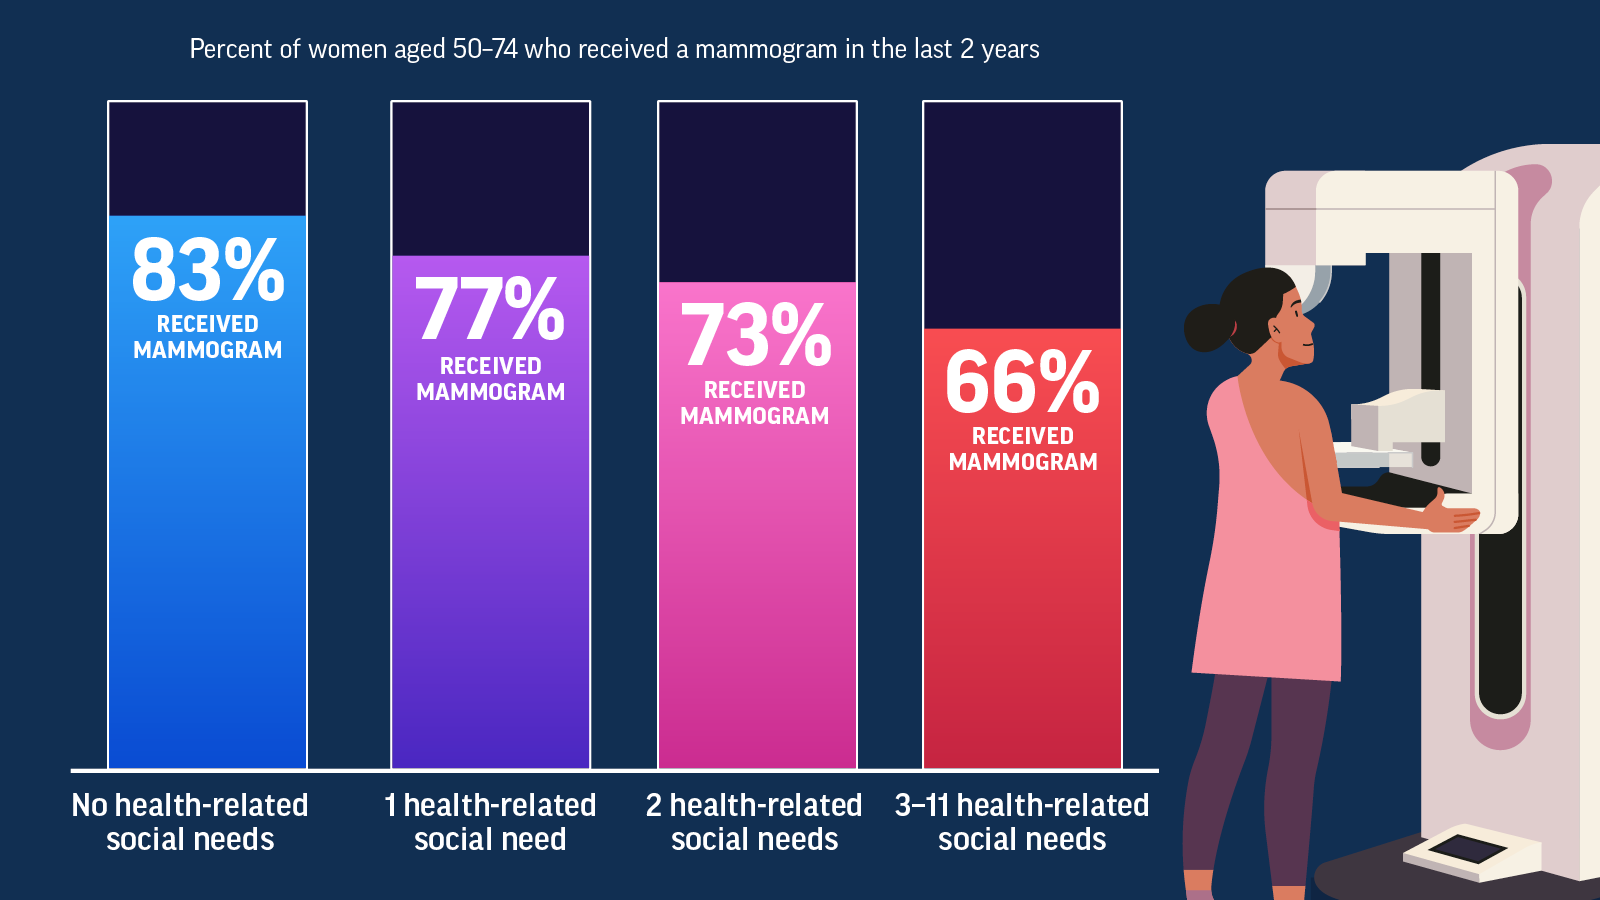 Infographic about women who were not experiencing health-related social needs were more likely to receive a mammogram